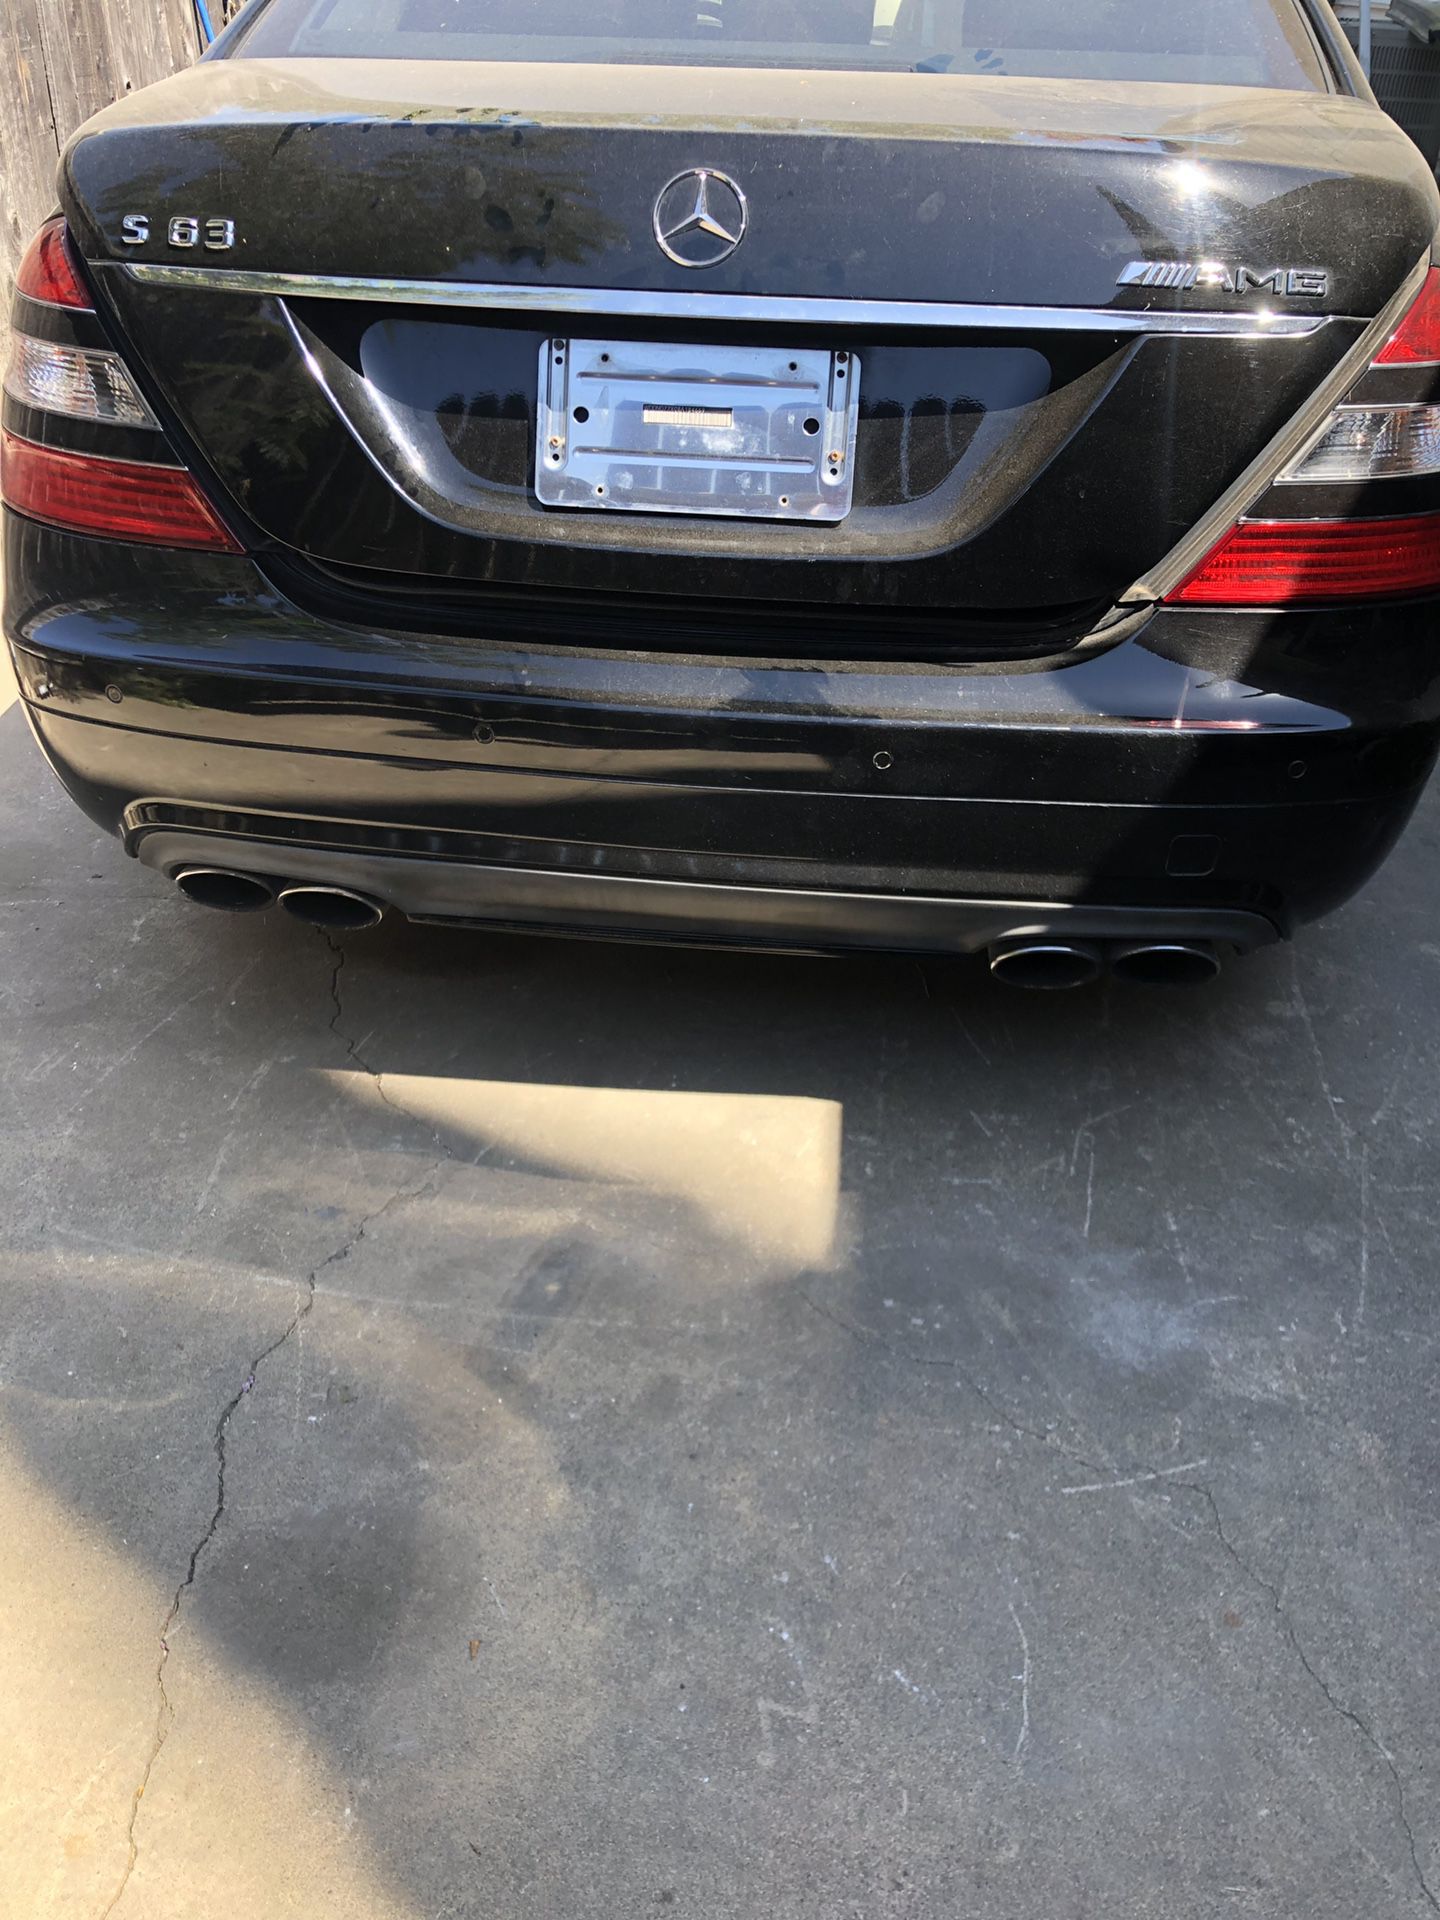 2008 Mercedes S63 AMG Parts only.